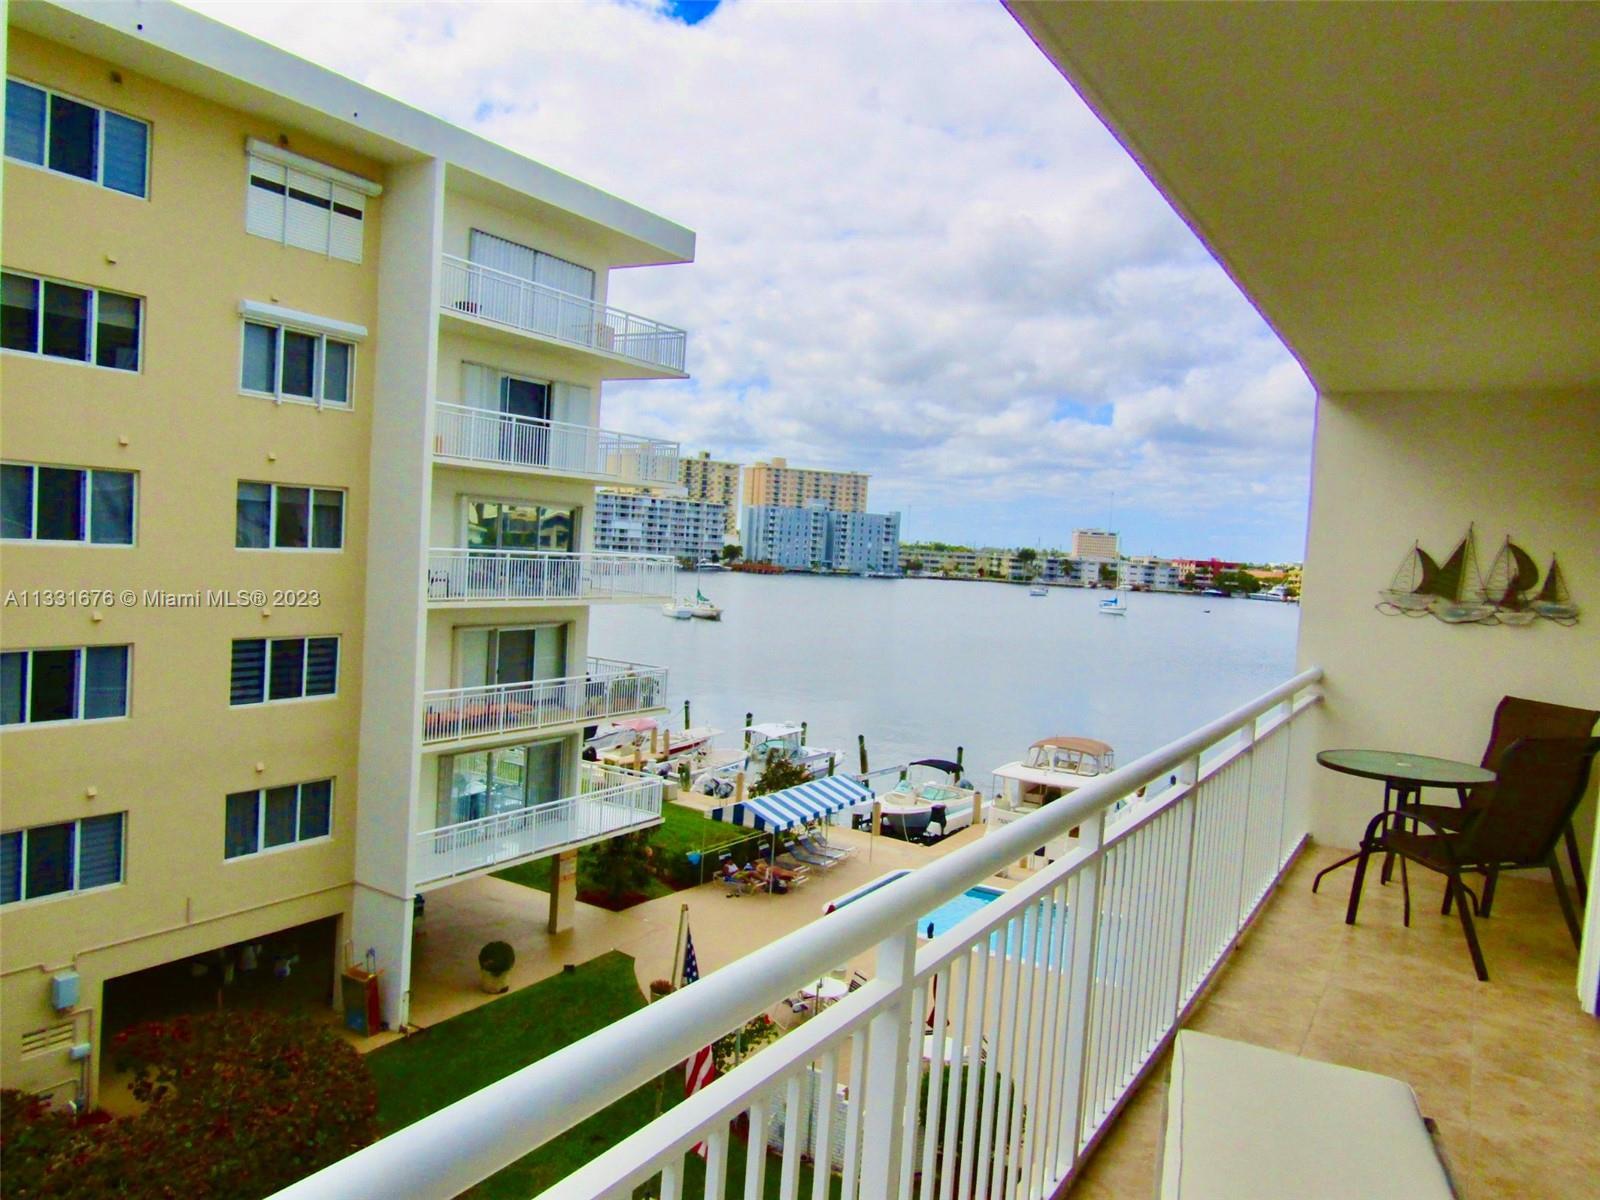 Impeccable corner unit with an amazing Panoramic water view from a wrap around balcony overlooking w